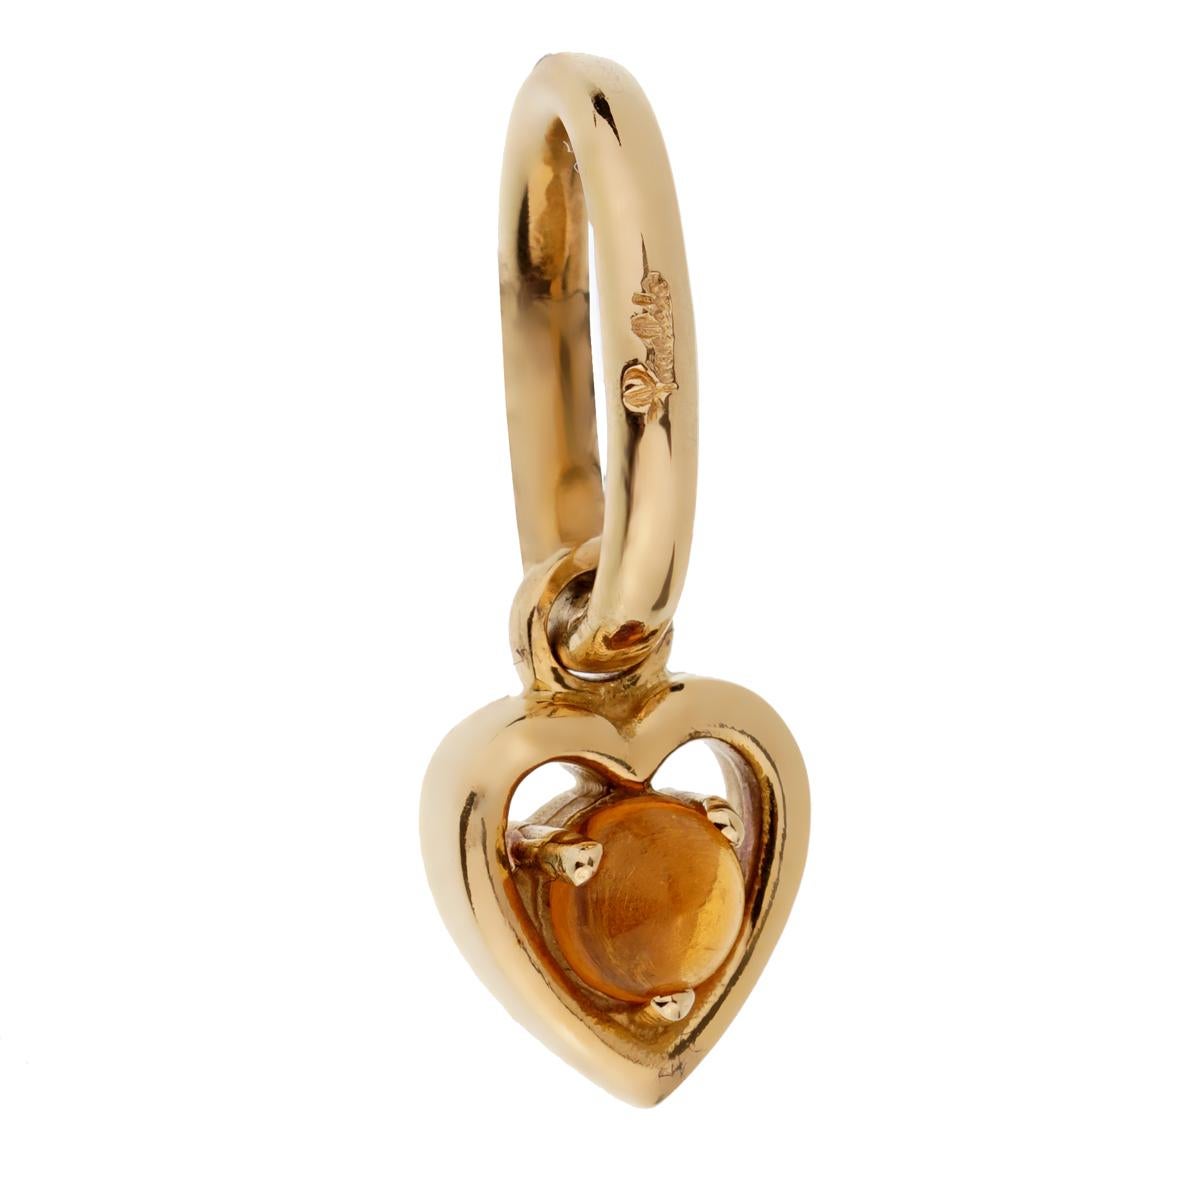 A chic brand new Pomellato charm pendant featuring a .30ct citrine set in 18k yellow gold. 

Sku: 2214